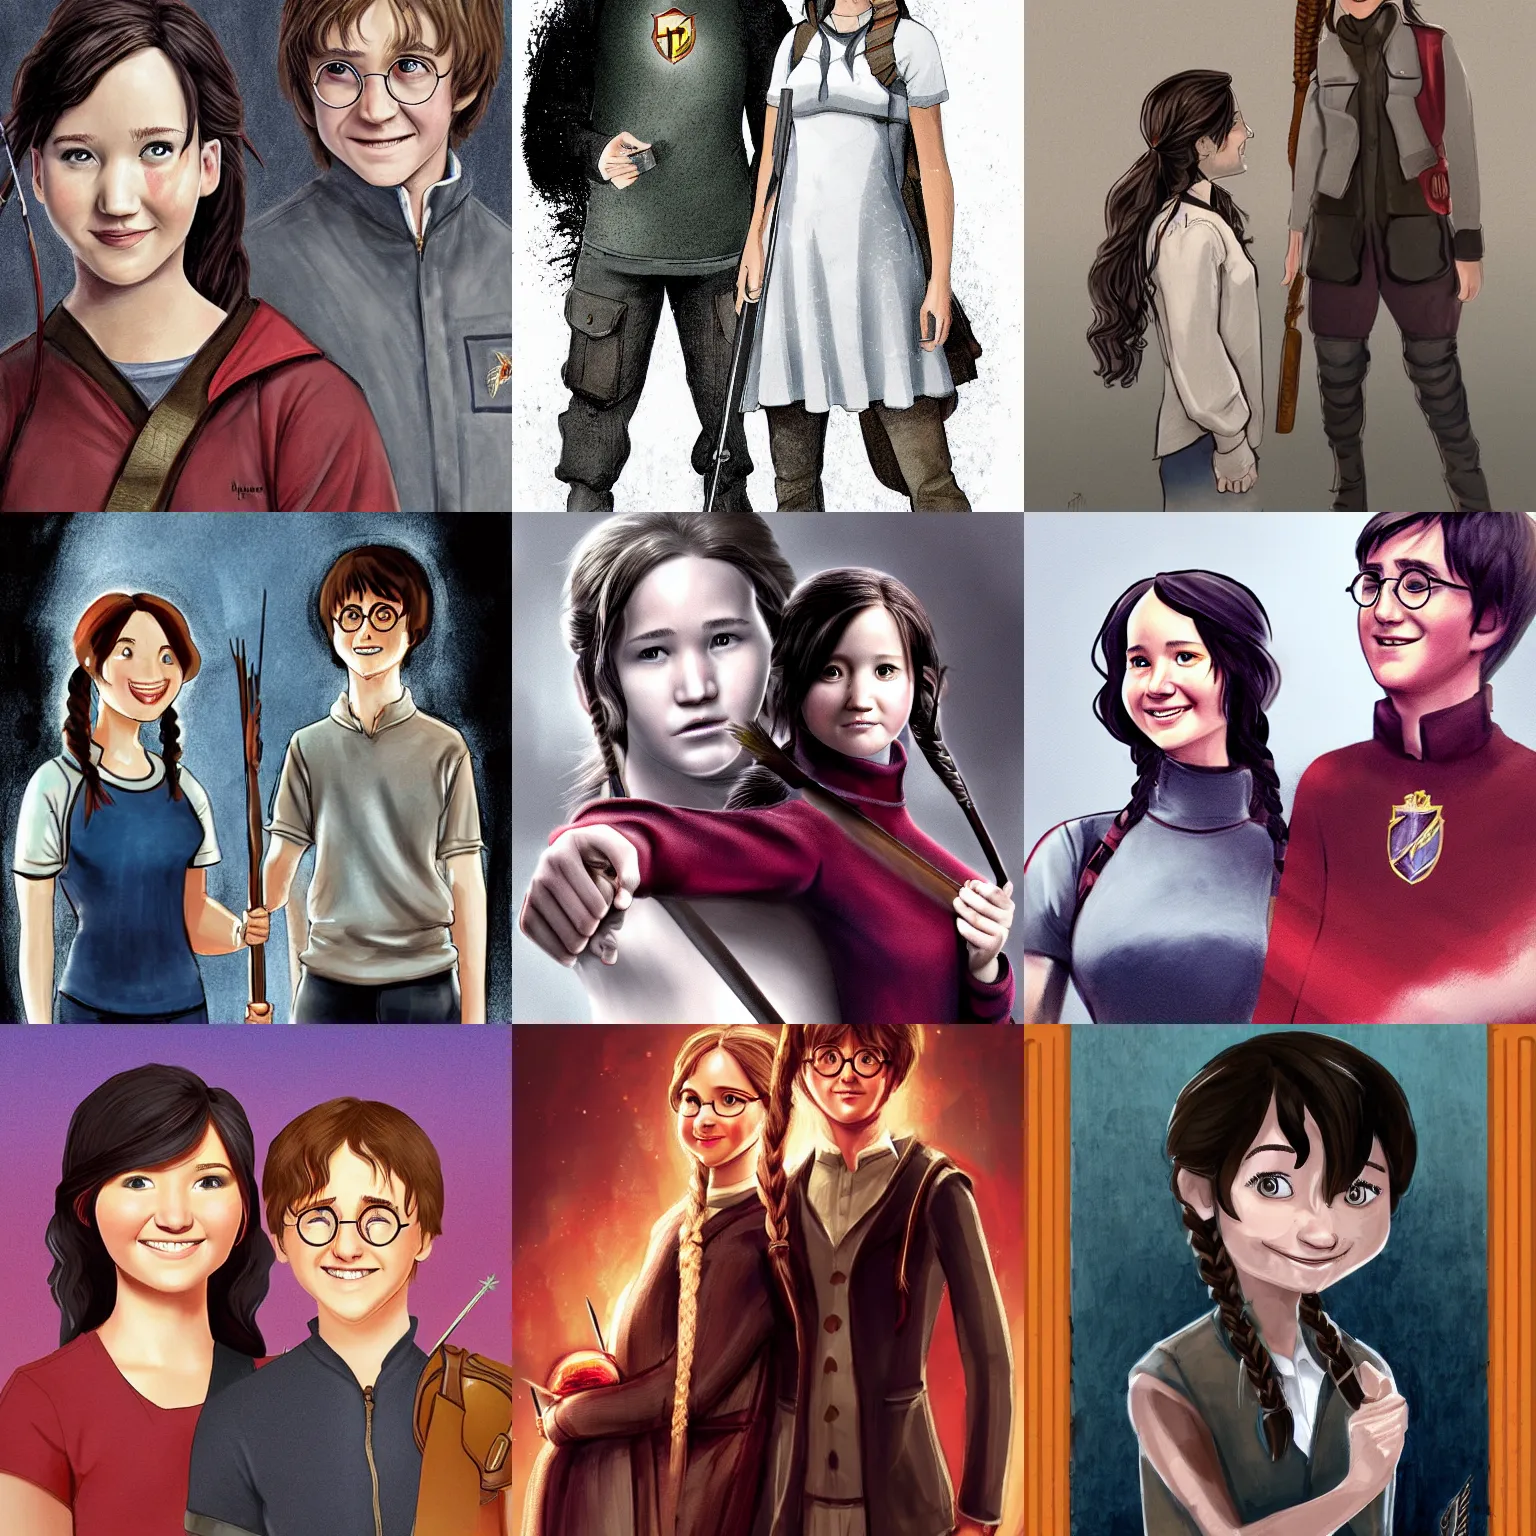 Prompt: Katniss Everdeen standing next to Harry Potter (Harry Potter and the Philosopher's Stone, 2001), both smiling for the camera, digital art by Grey Rutkowski